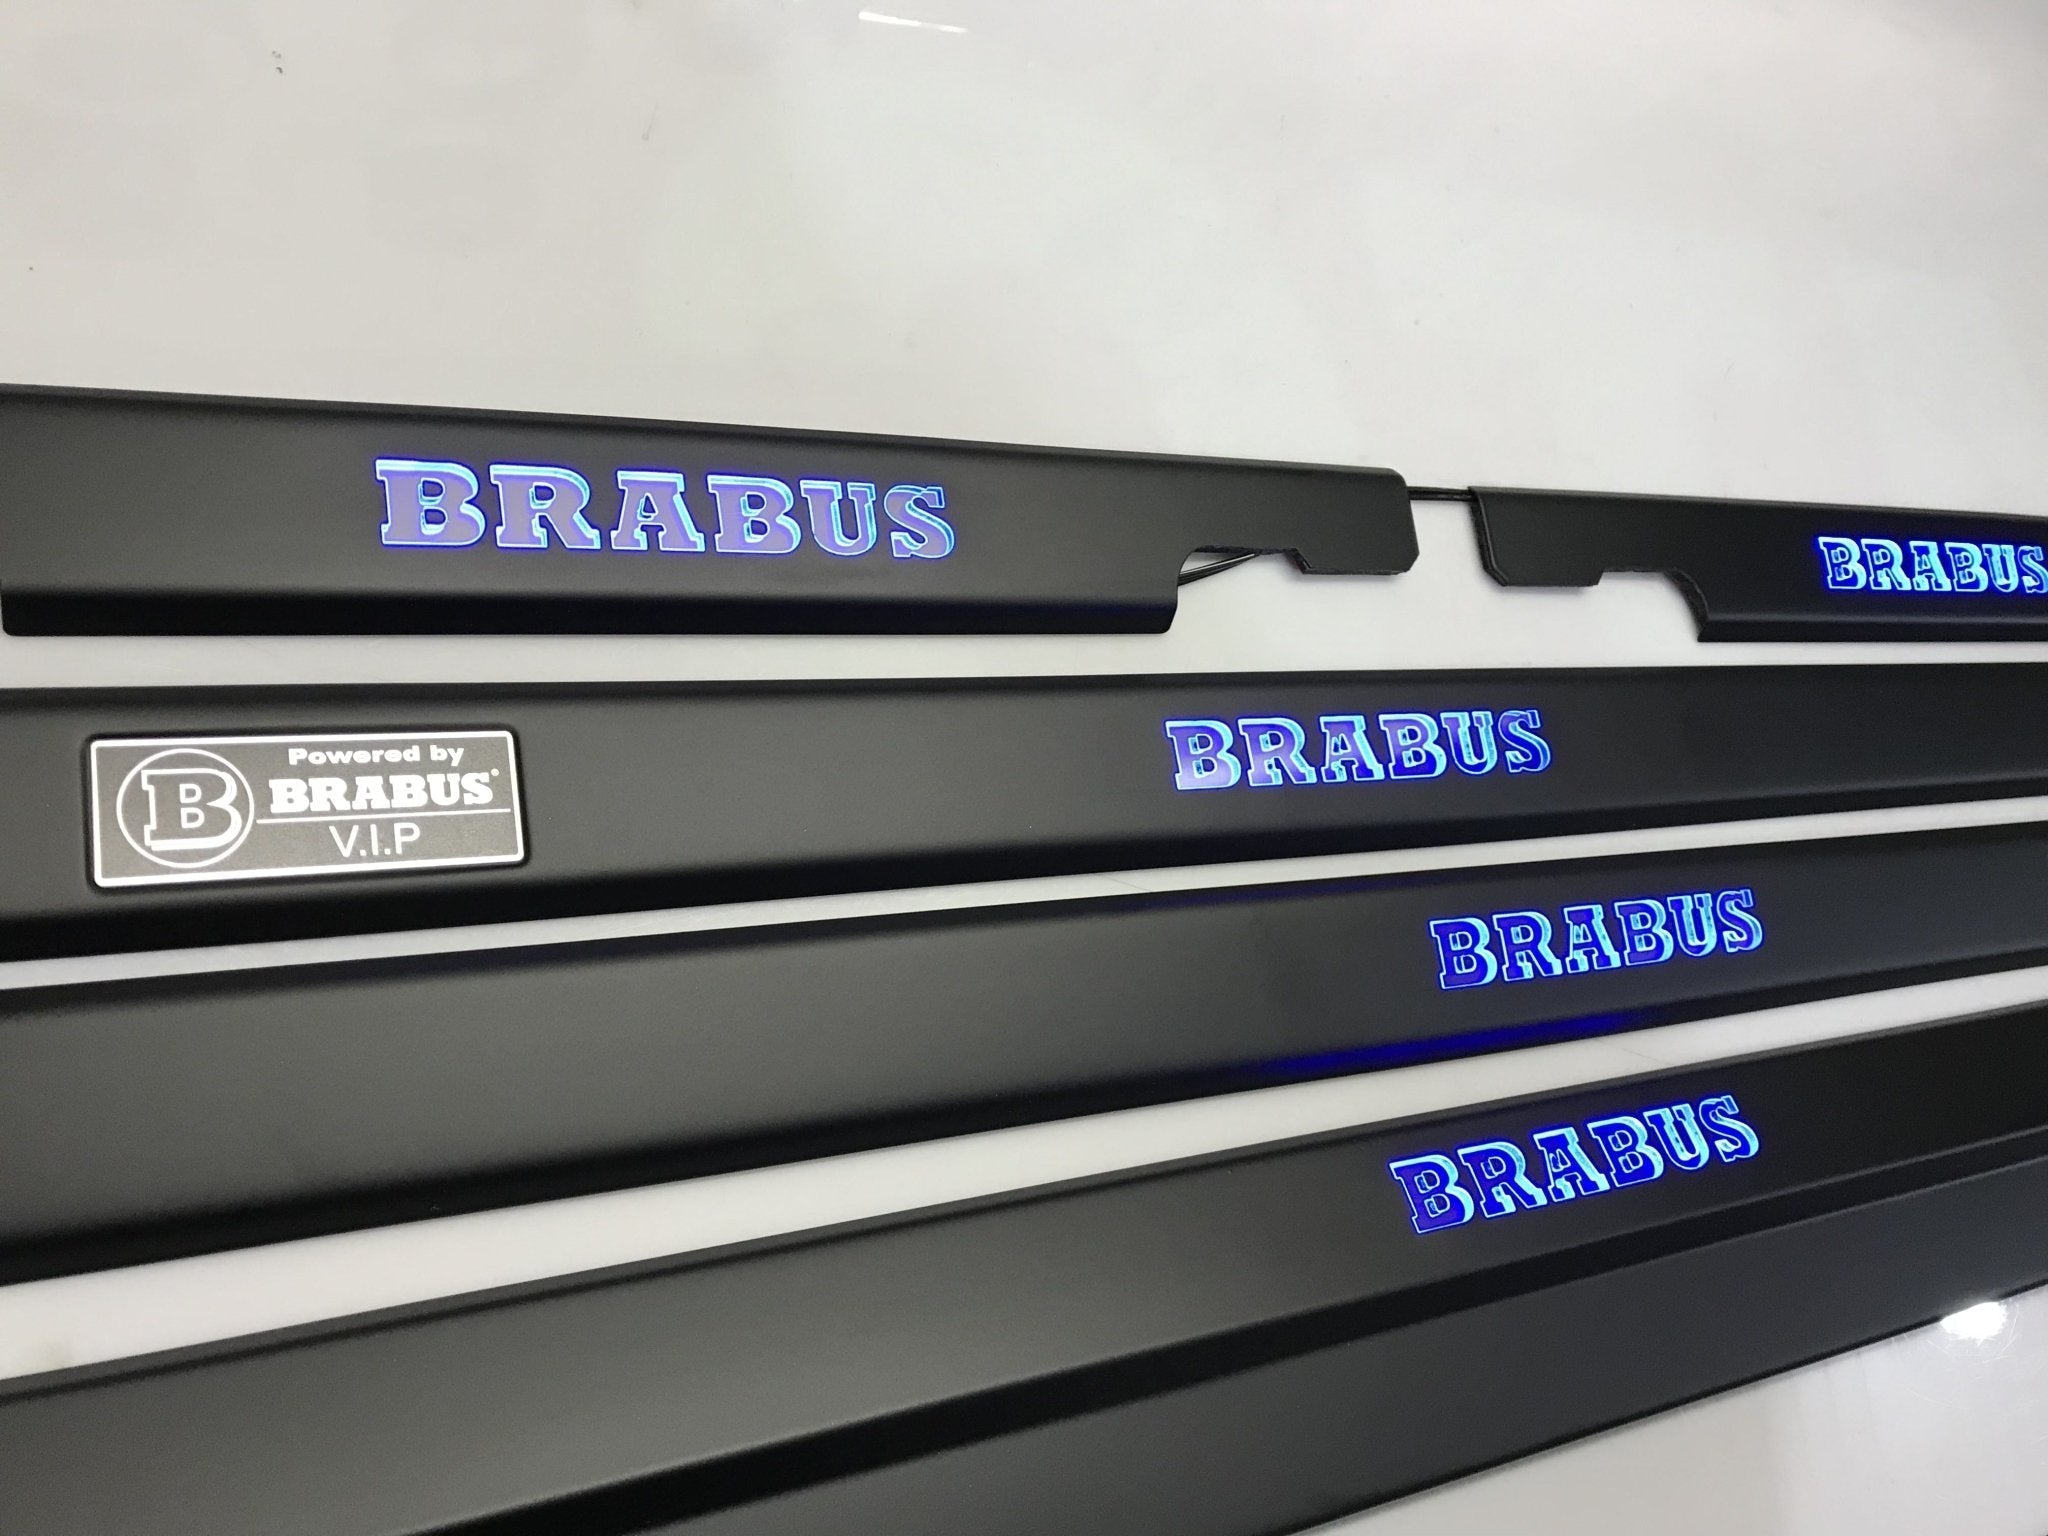 Brabus LED Illuminated Door Sills 4 or 5 pcs for Mercedes-Benz G-Class W463